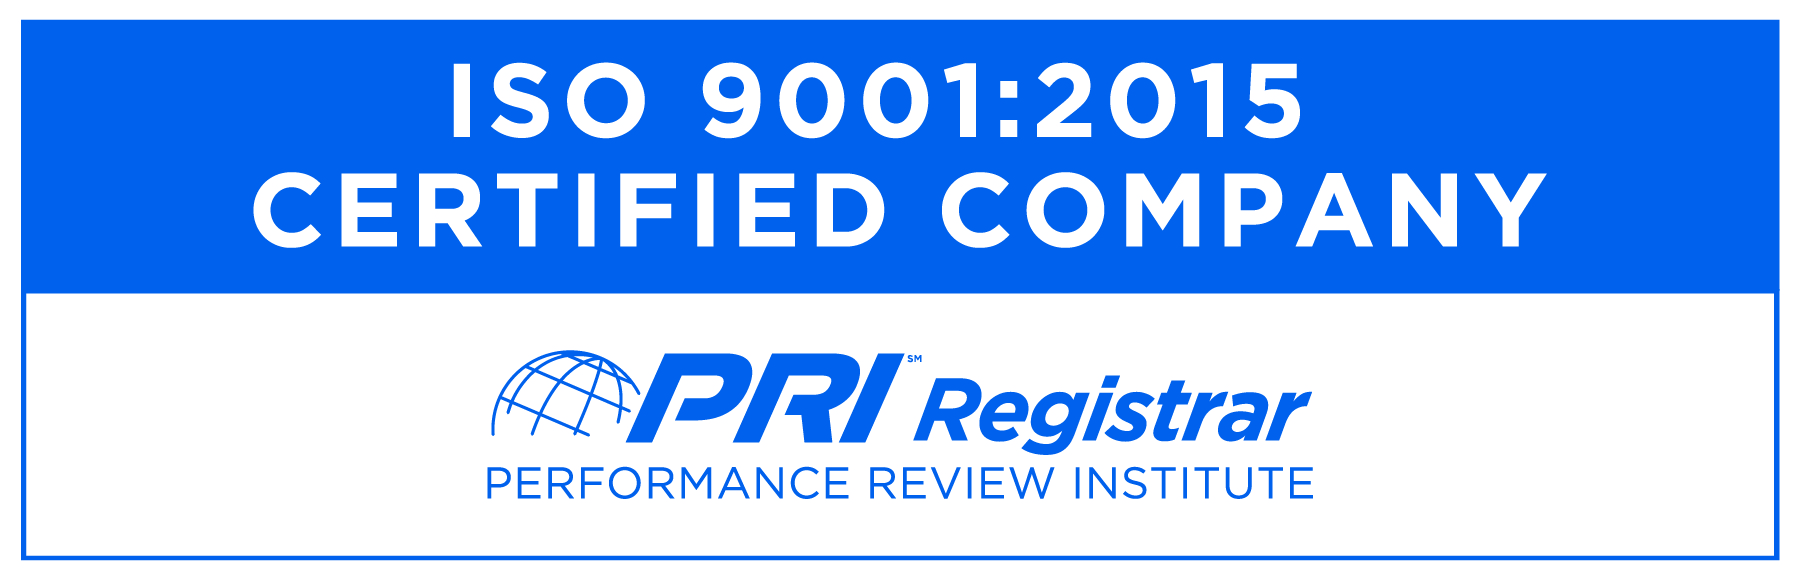 A ISO 9001:2015 Certified Company